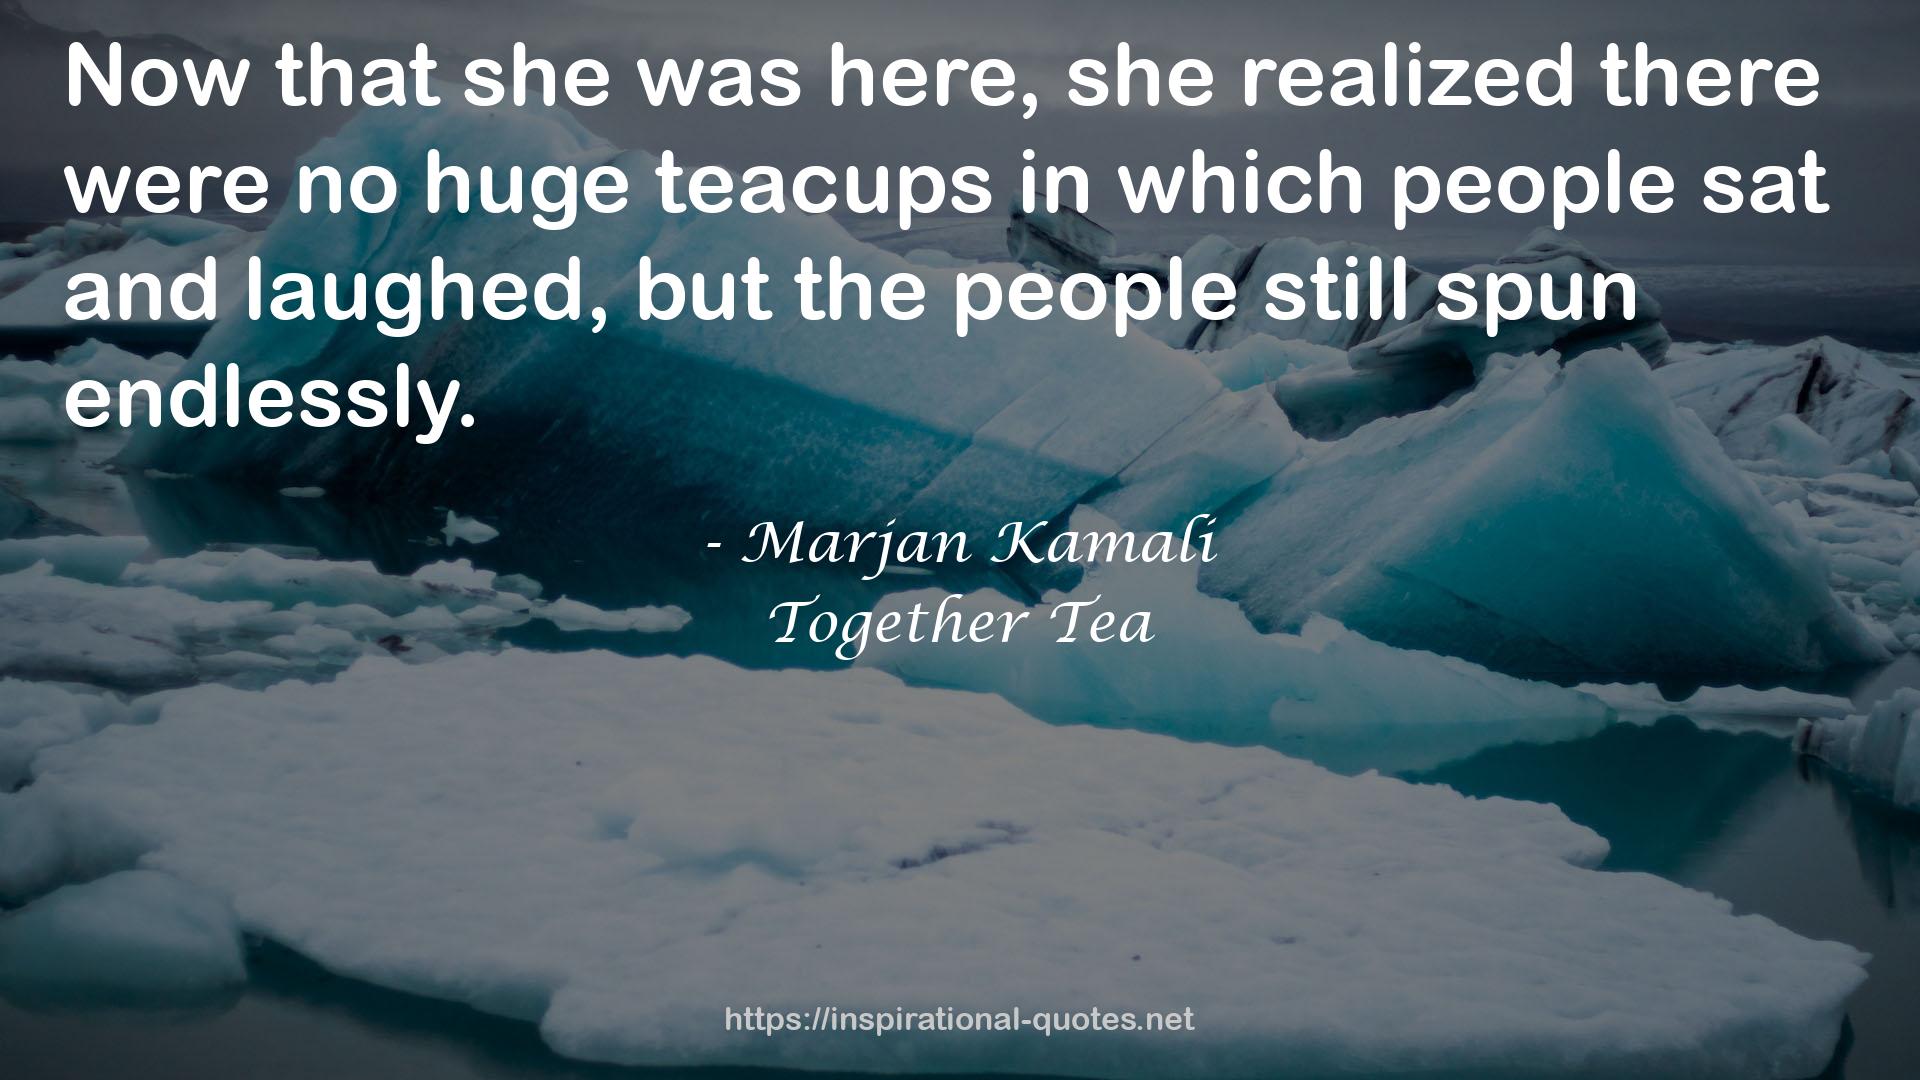 Together Tea QUOTES